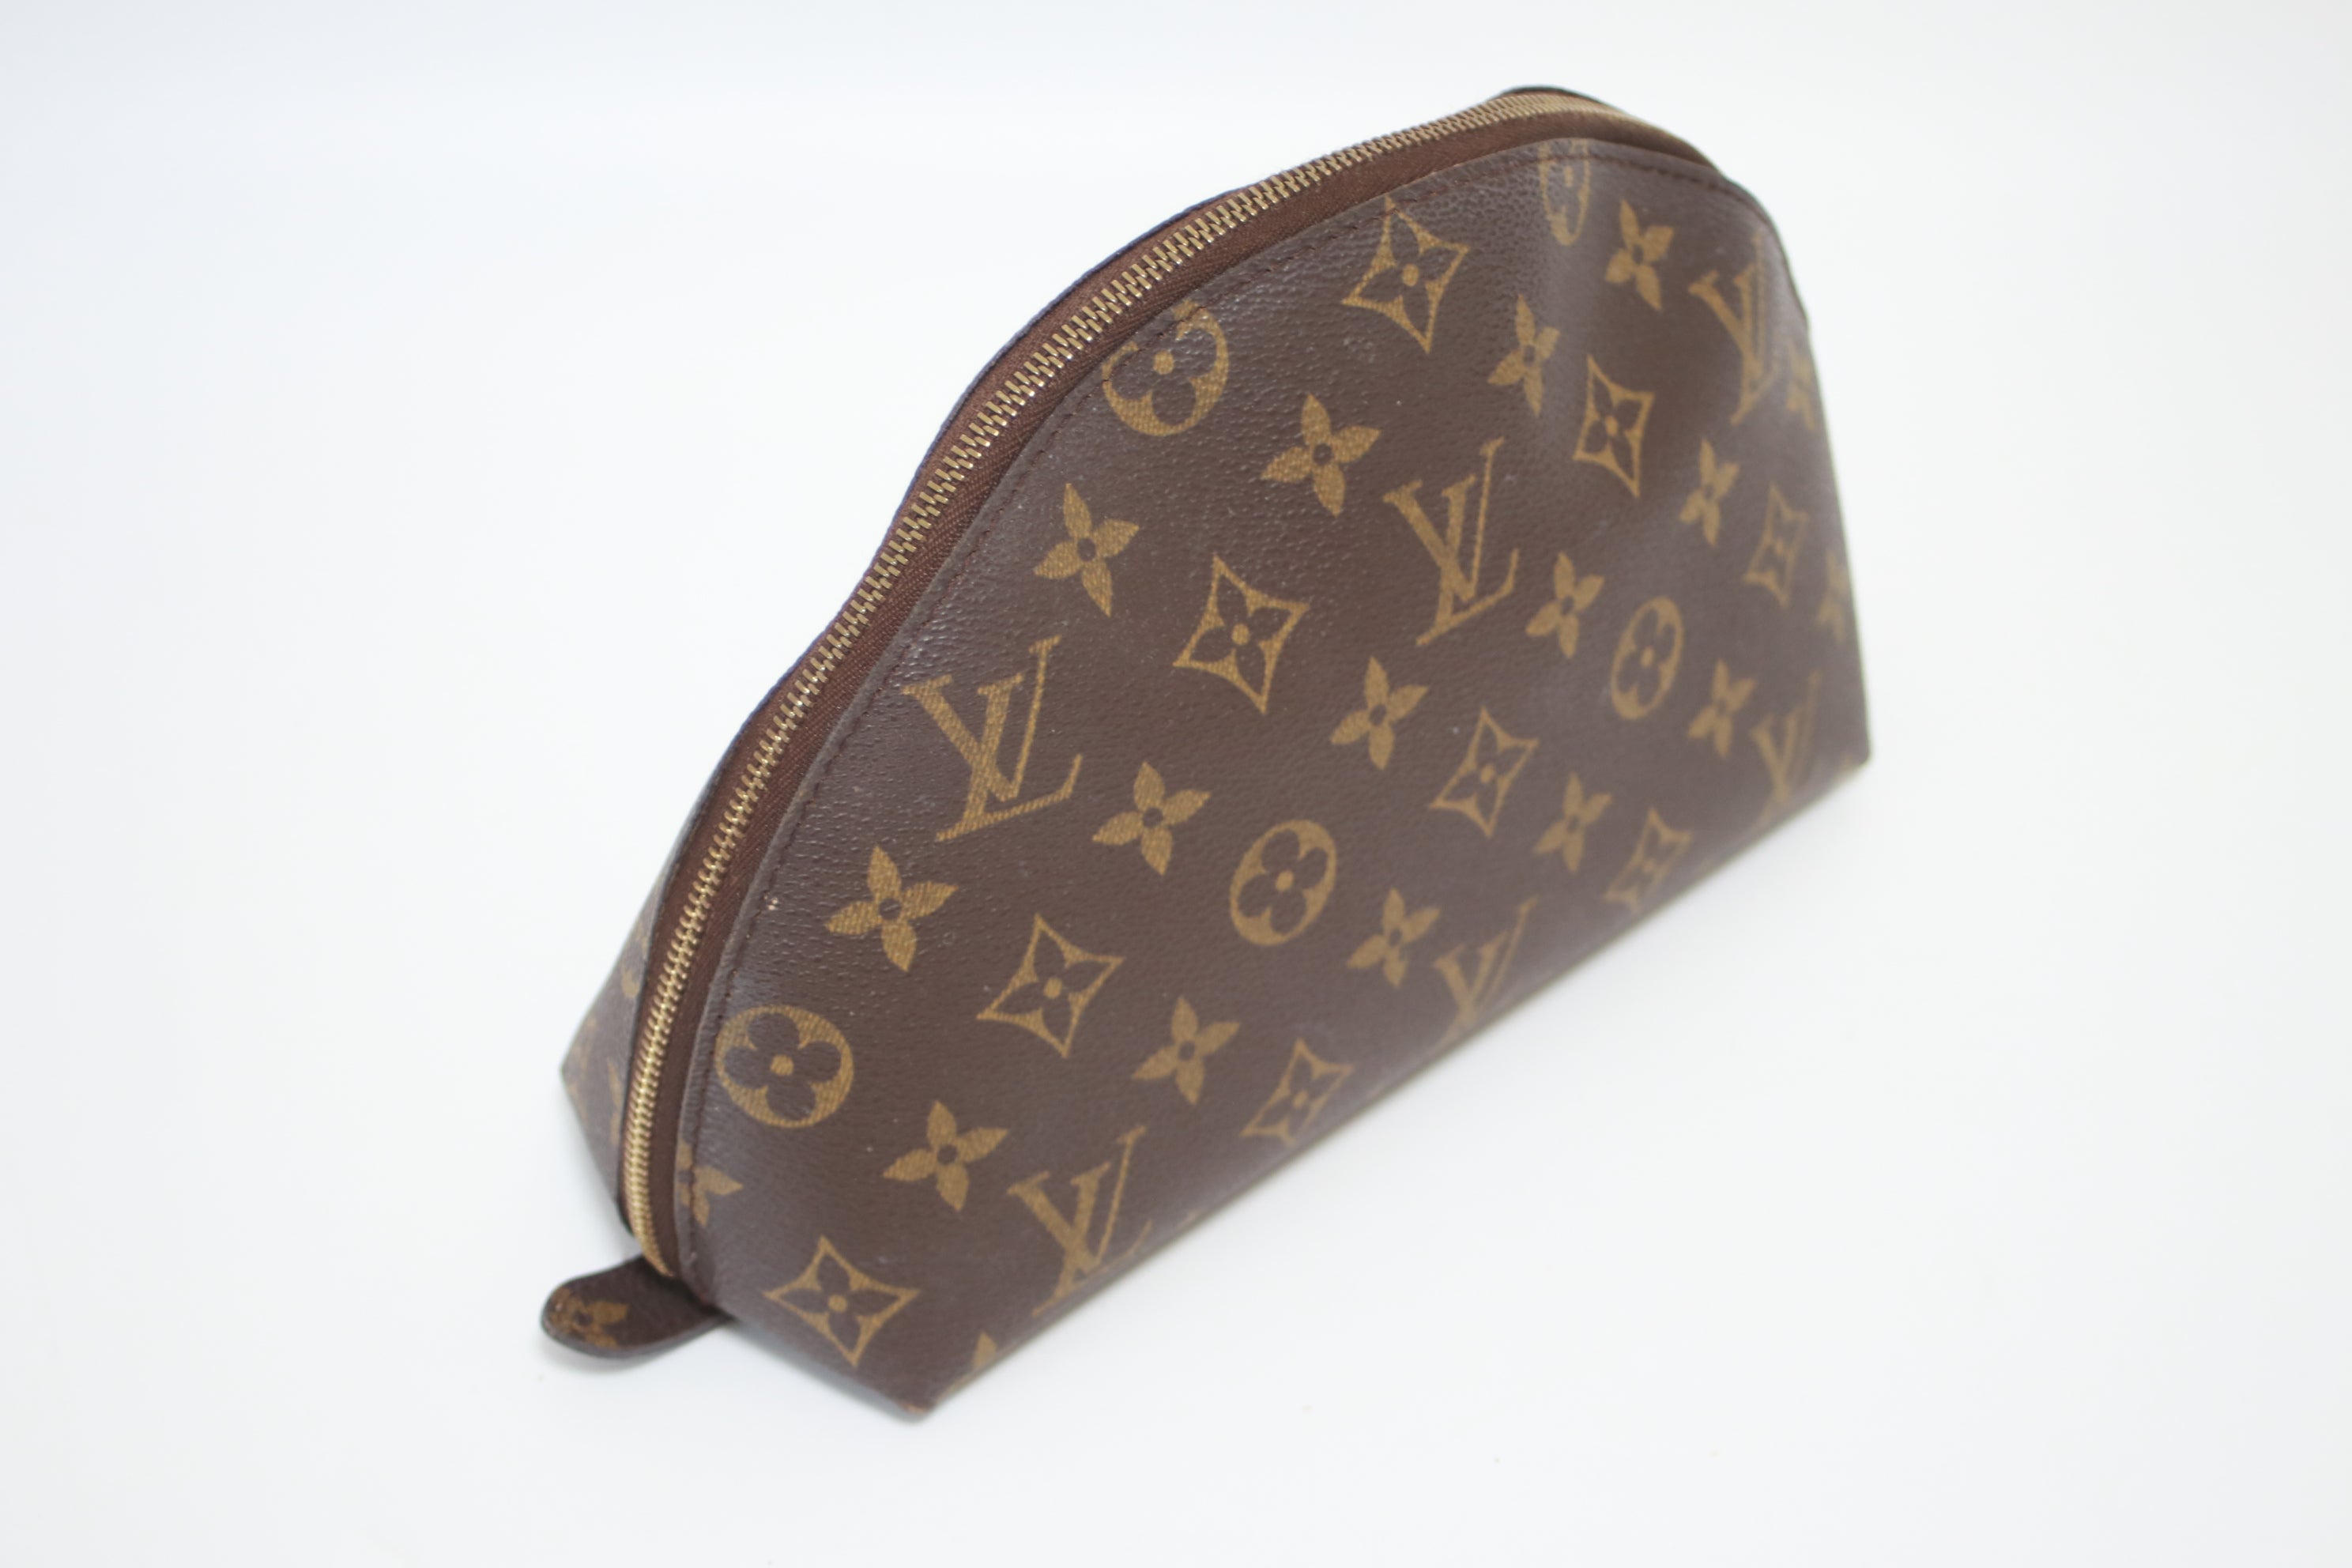 Louis Vuitton Demi Ronde Pouch Used (8098)